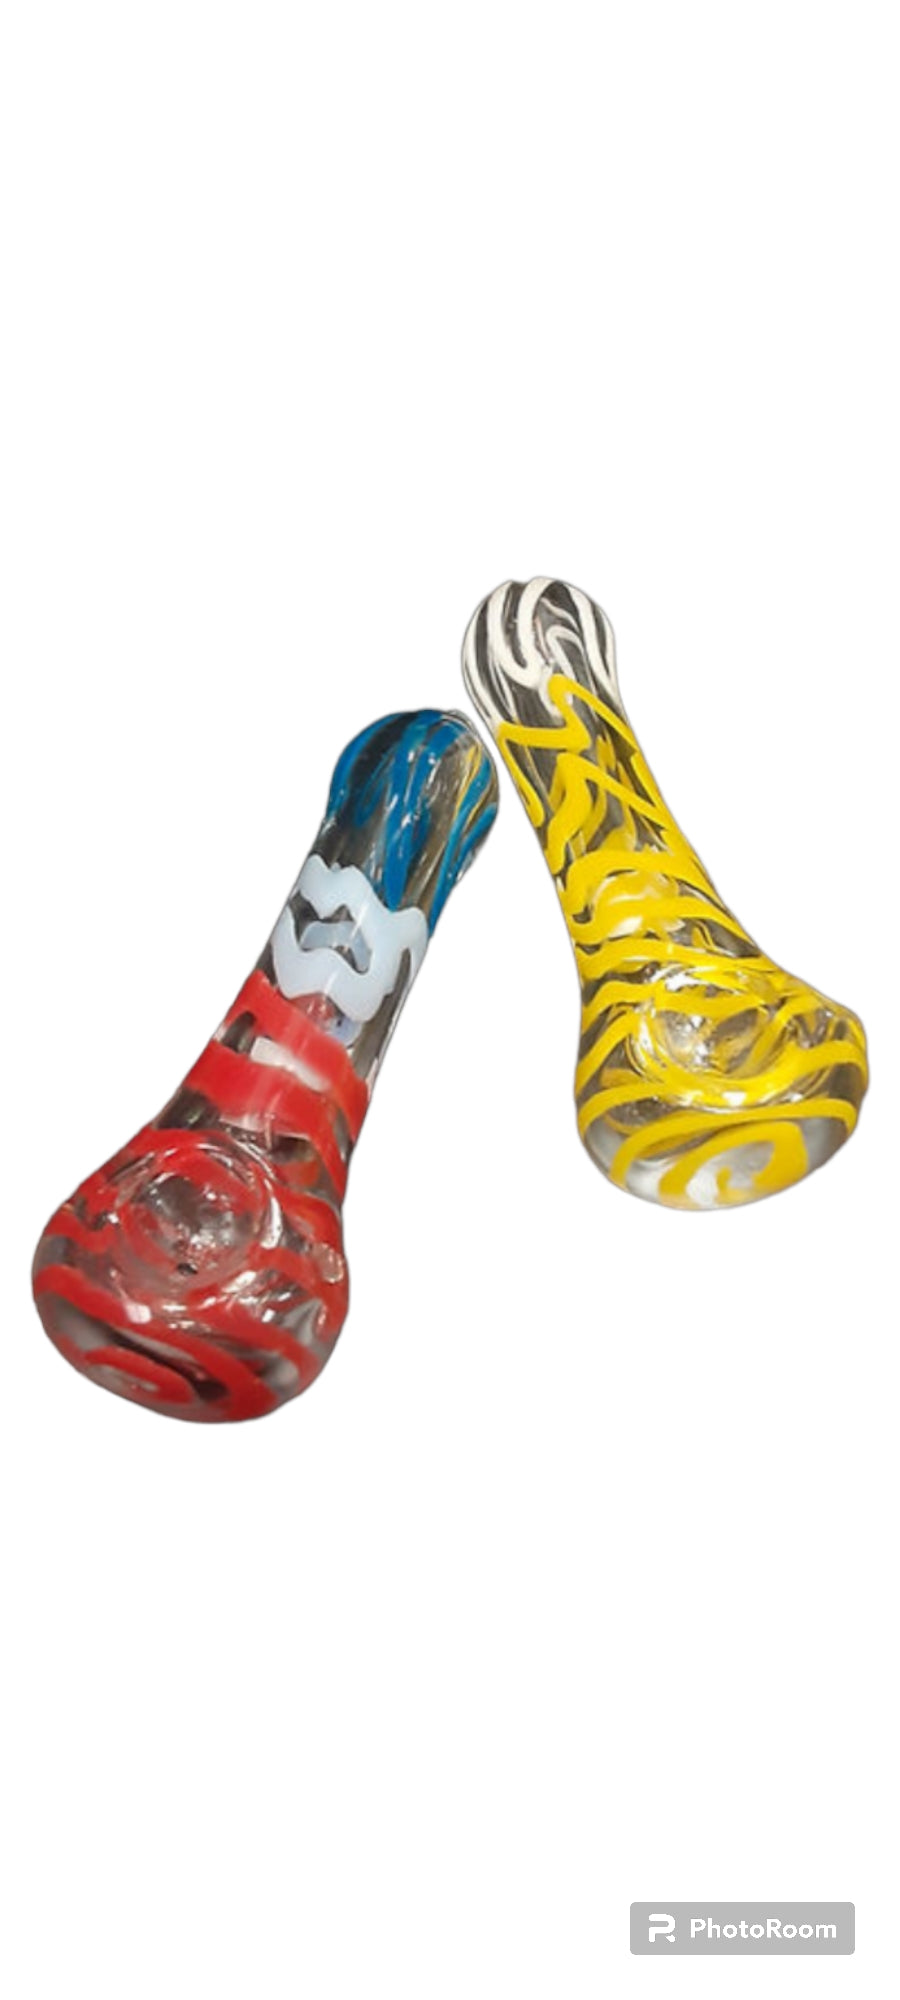 Swirled Colored Pipes